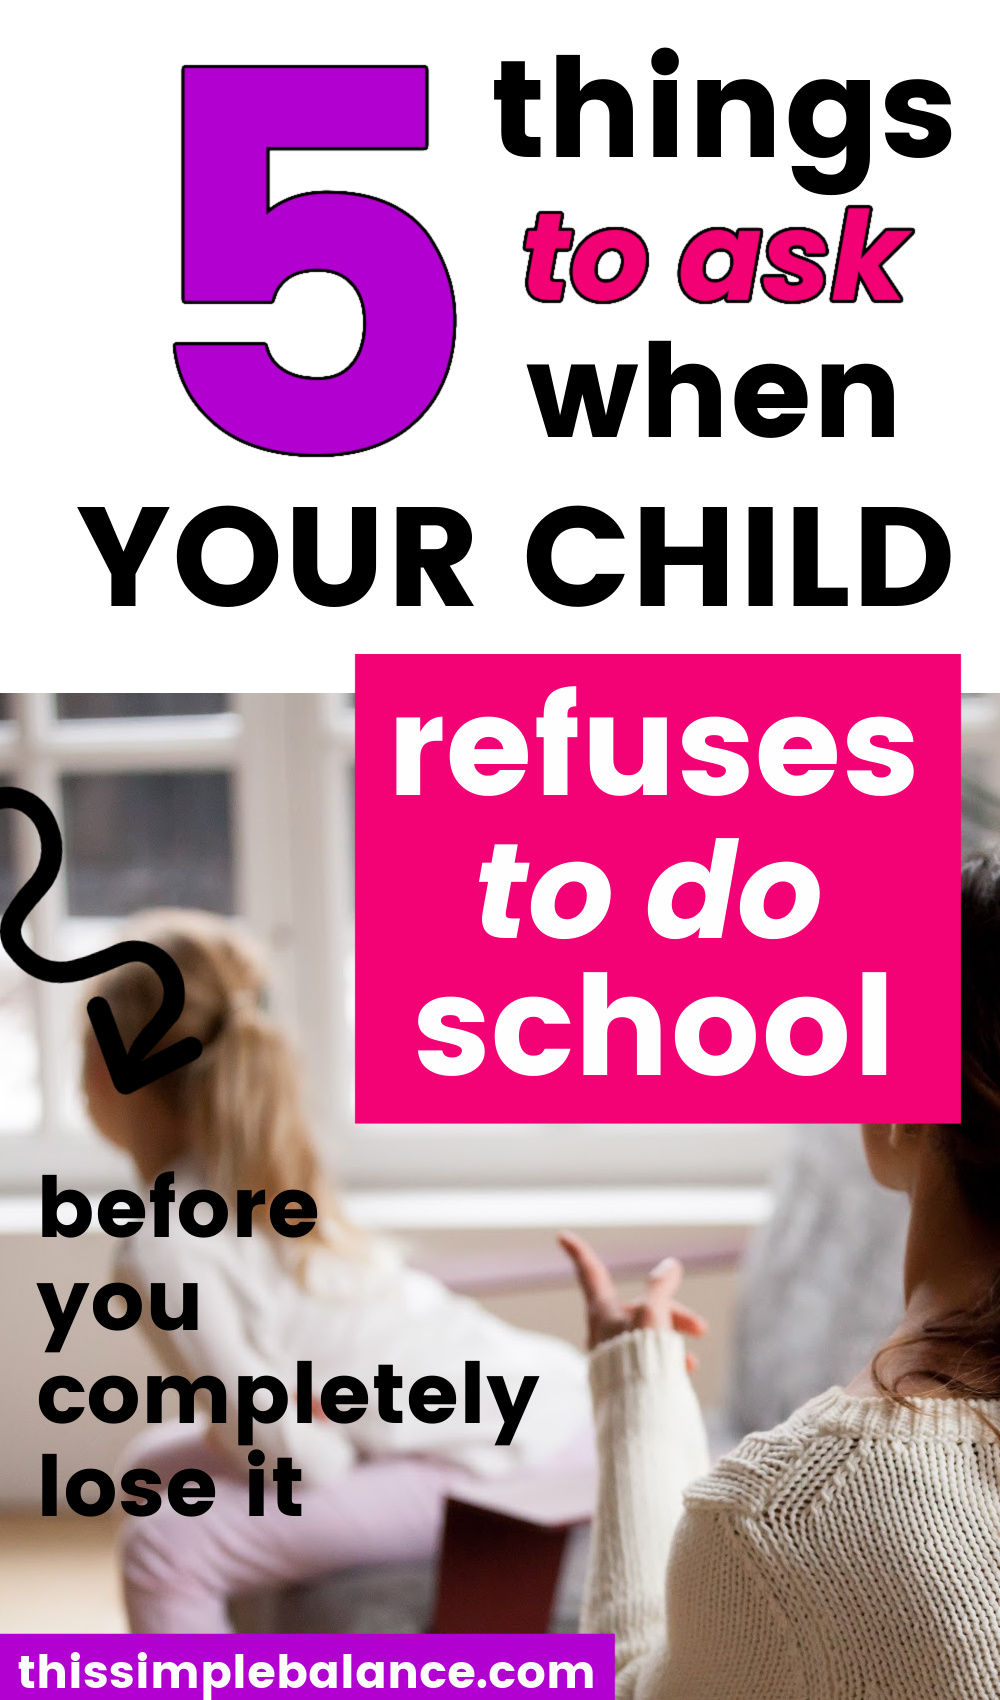 mom pointing finger at daughter whose back is turned, refusing to do school work, with text overlay, "5 things to ask when your child refuses to do school - before you completely lose it"